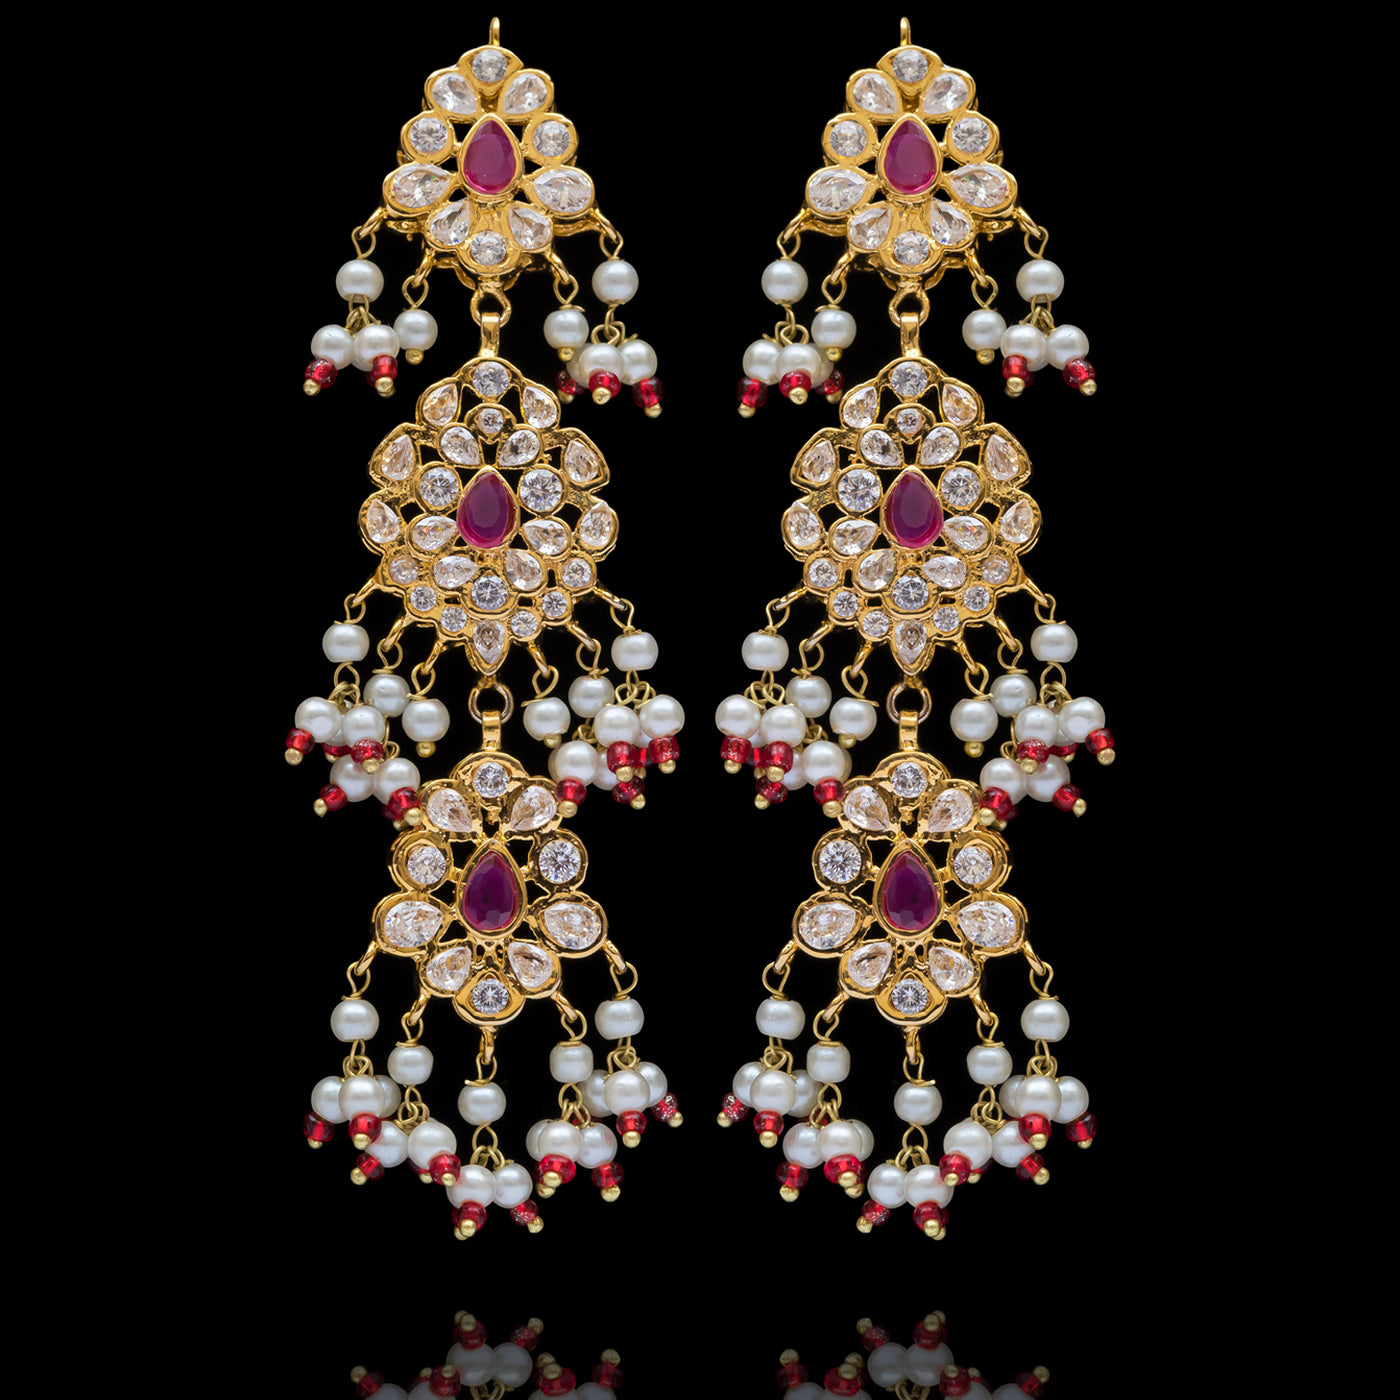 Rabiah Set Ruby - Available in 3 Options